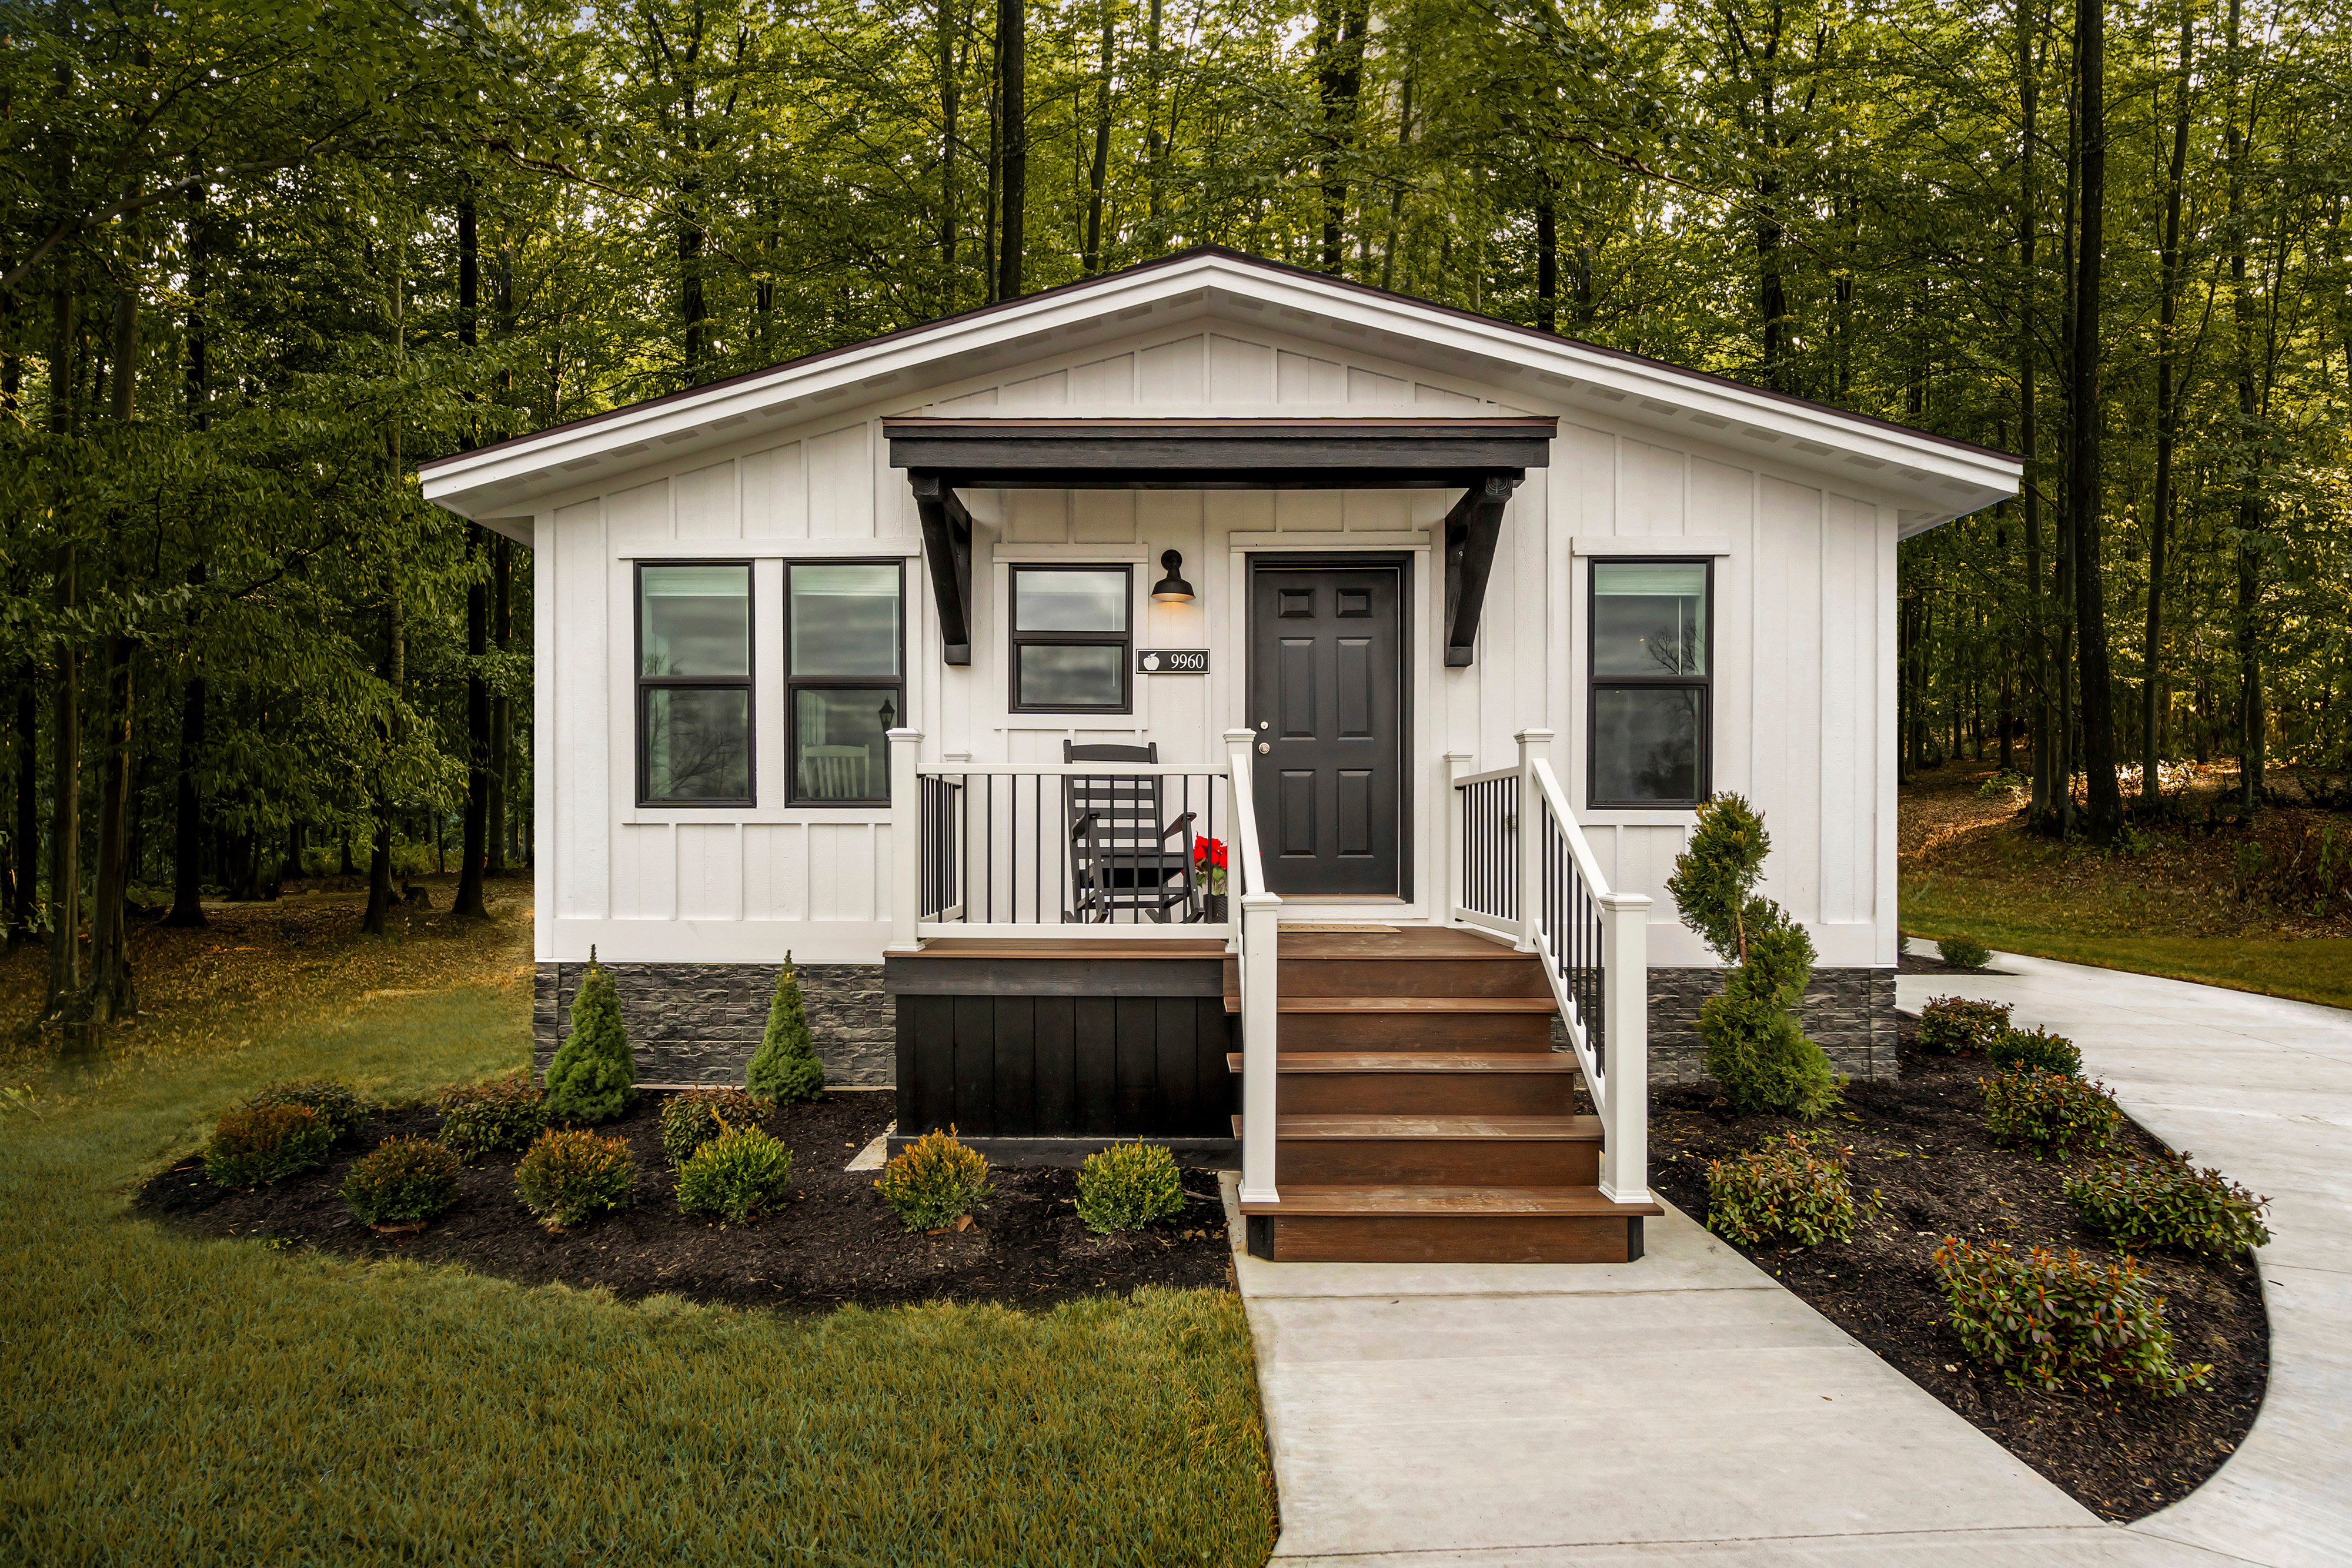 Can a Mobile or Manufactured Home Be Real Property?